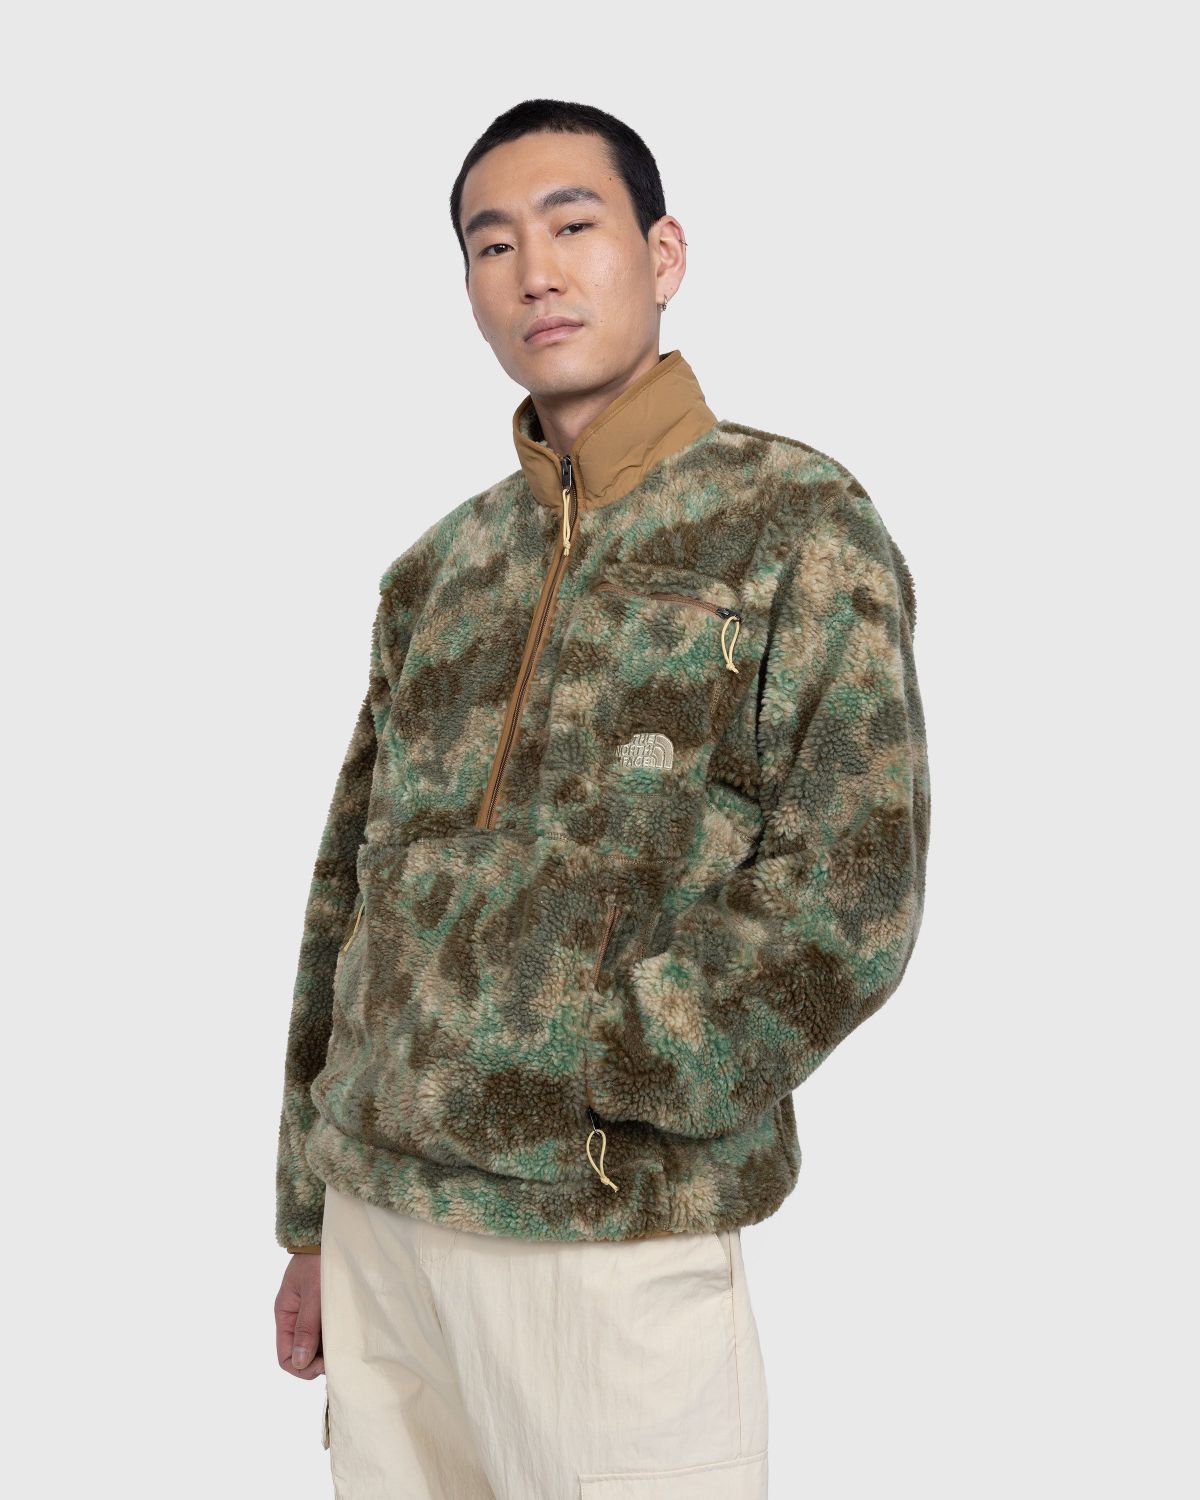 The North Face – Extreme Pile Pullover Military Olive/Stippled Camo Print - Fleece - Green - Image 2